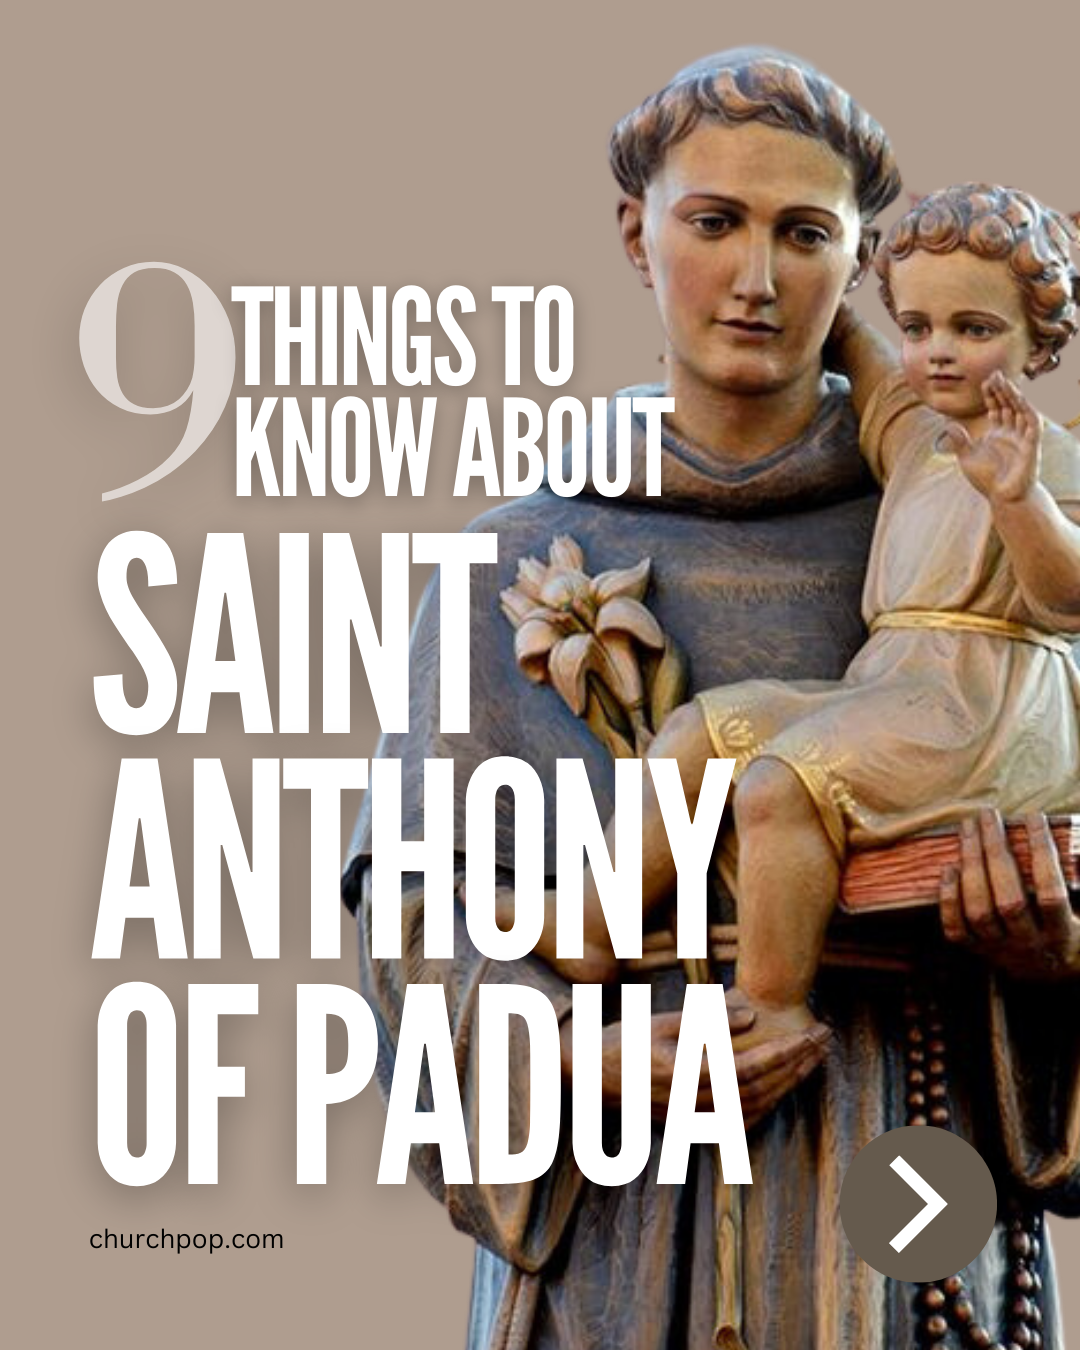 Who is Saint Anthony